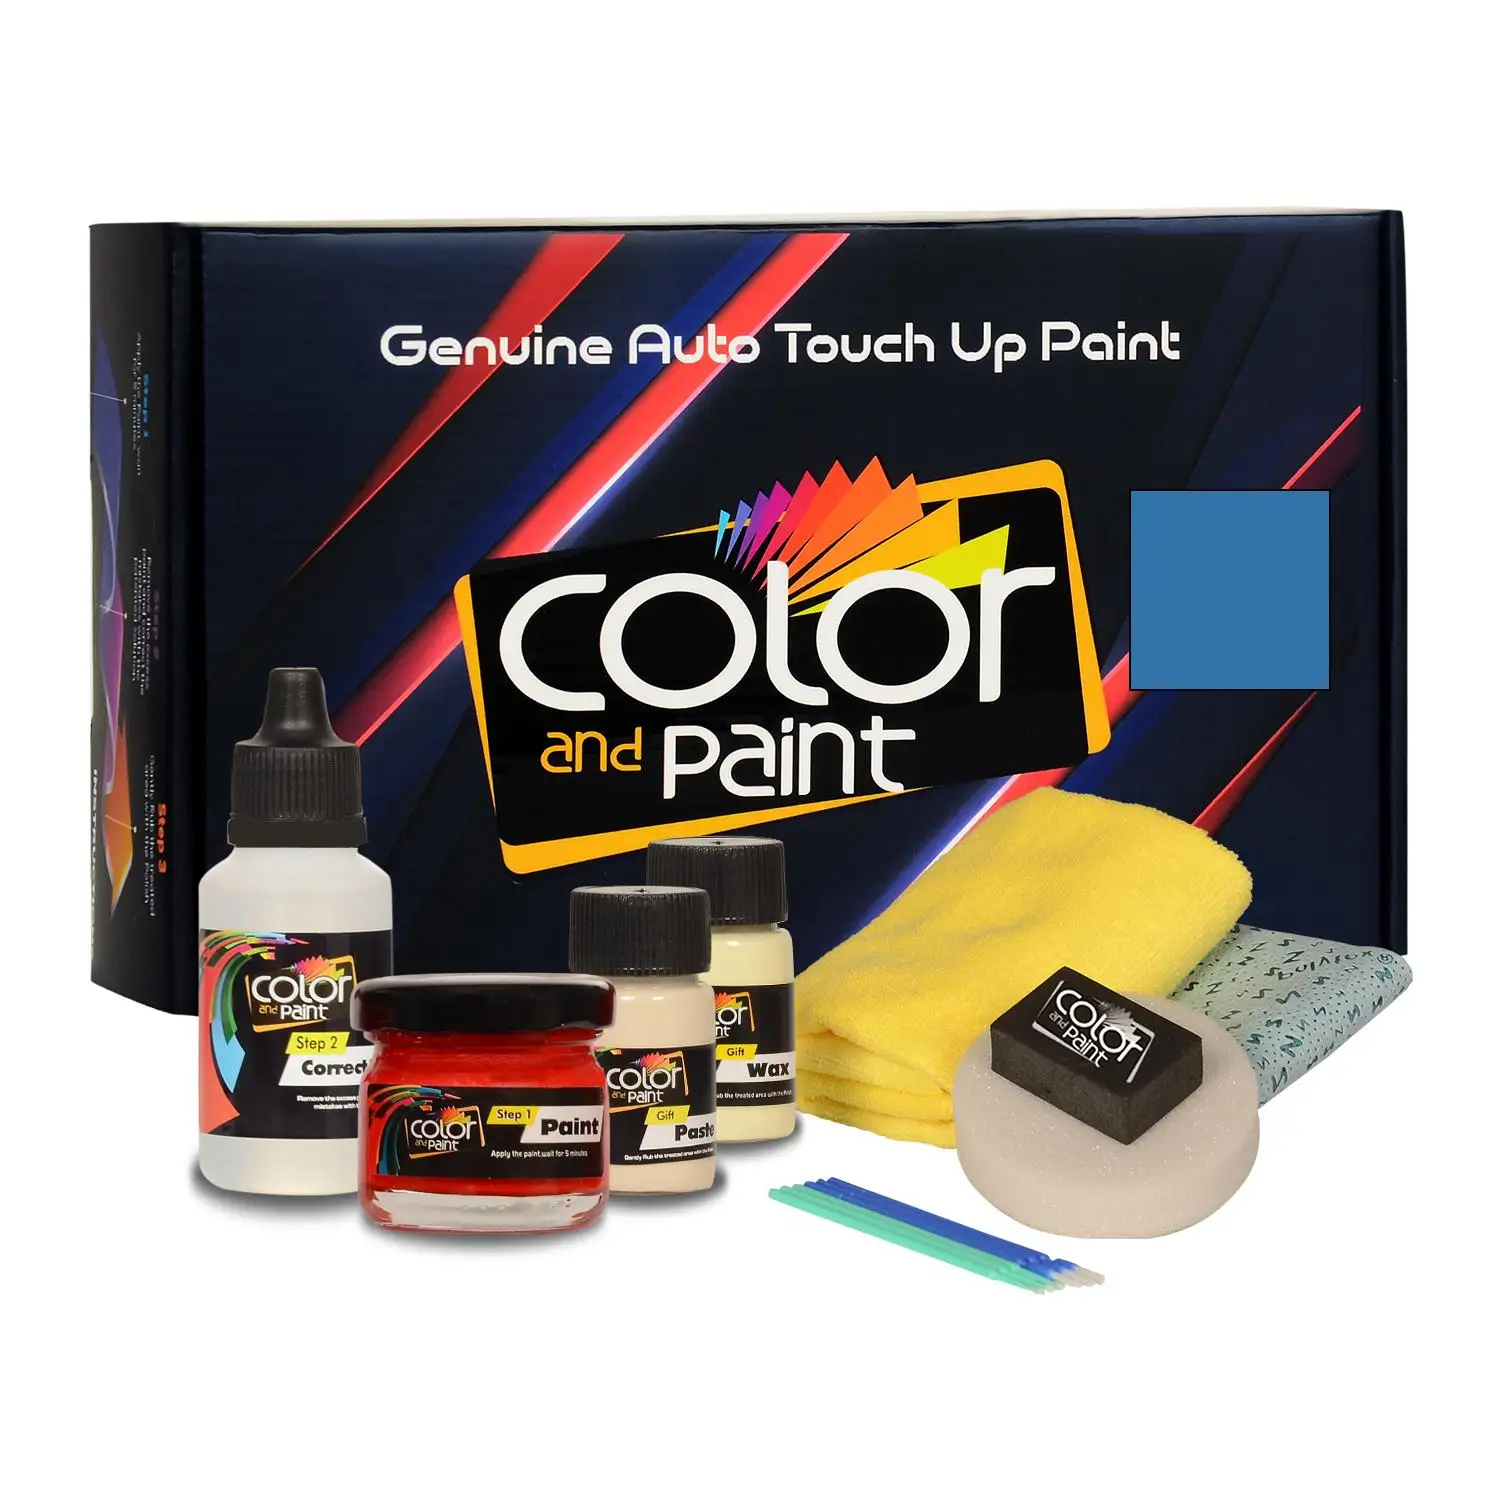 

Color and Paint compatible with Dodge Automotive Touch Up Paint - DAYTONA BLUE MET - PB4 - Basic Care